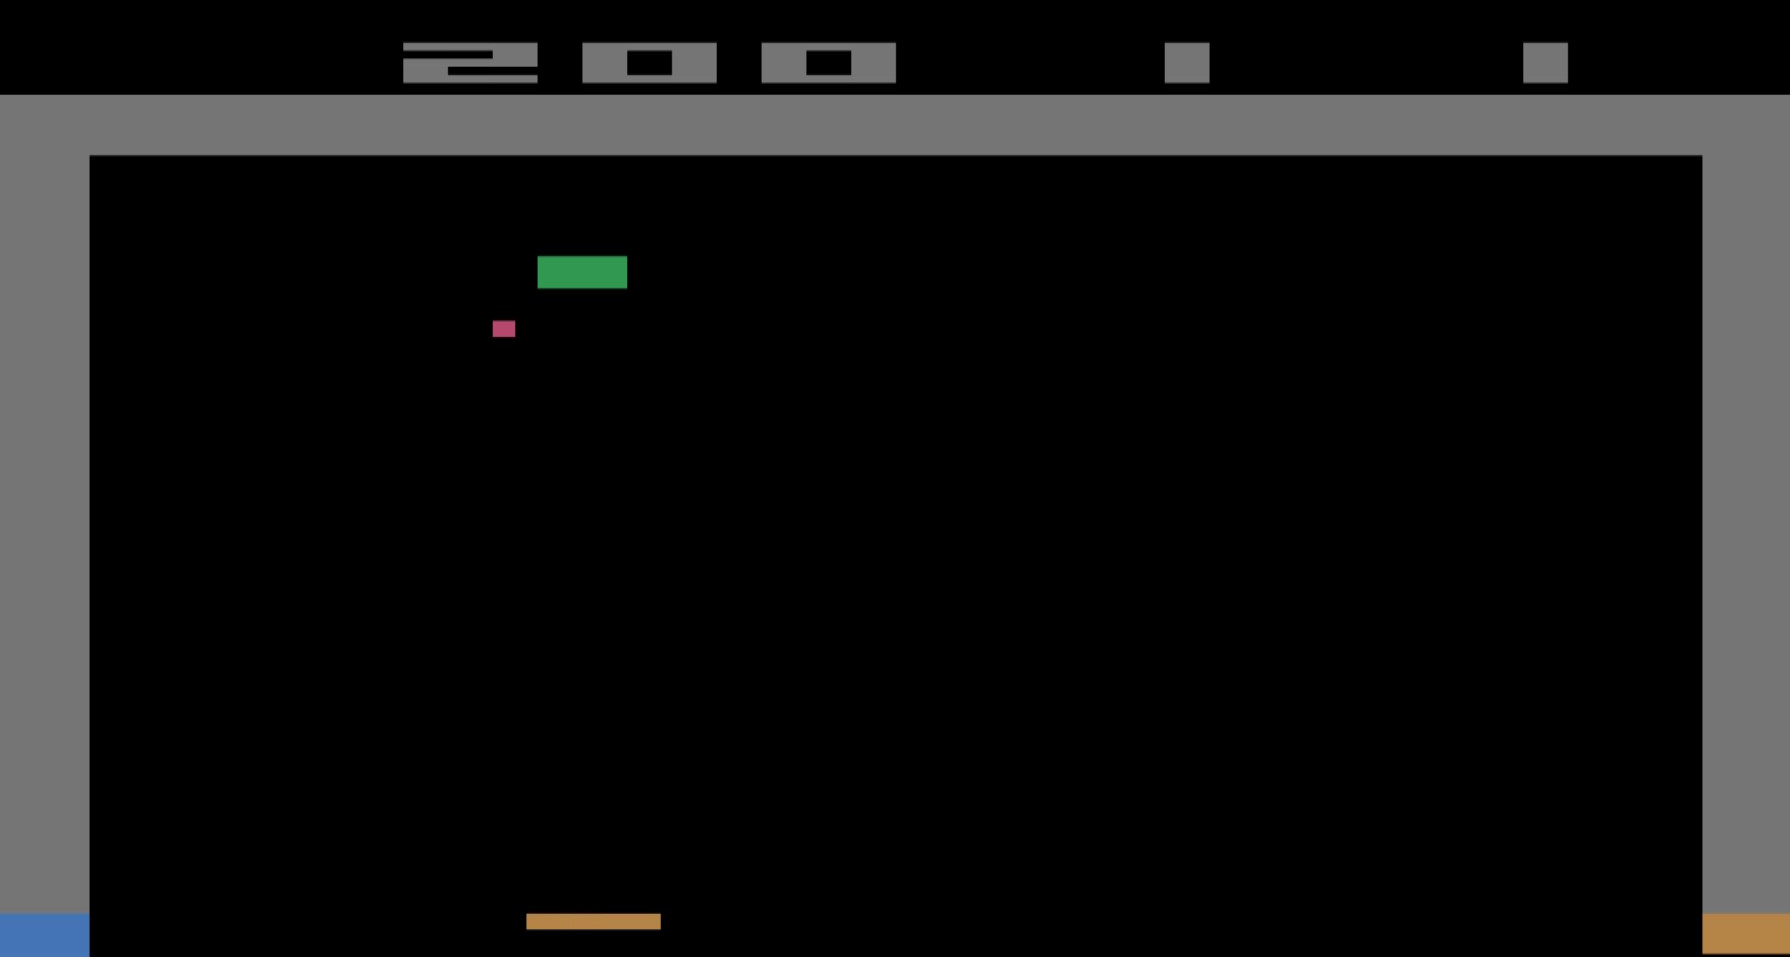 TheTrickster: Breakout: Game 7 [All Bricks Cleared] (Atari 2600 Emulated Novice/B Mode) 200 points on 2016-06-15 05:26:49